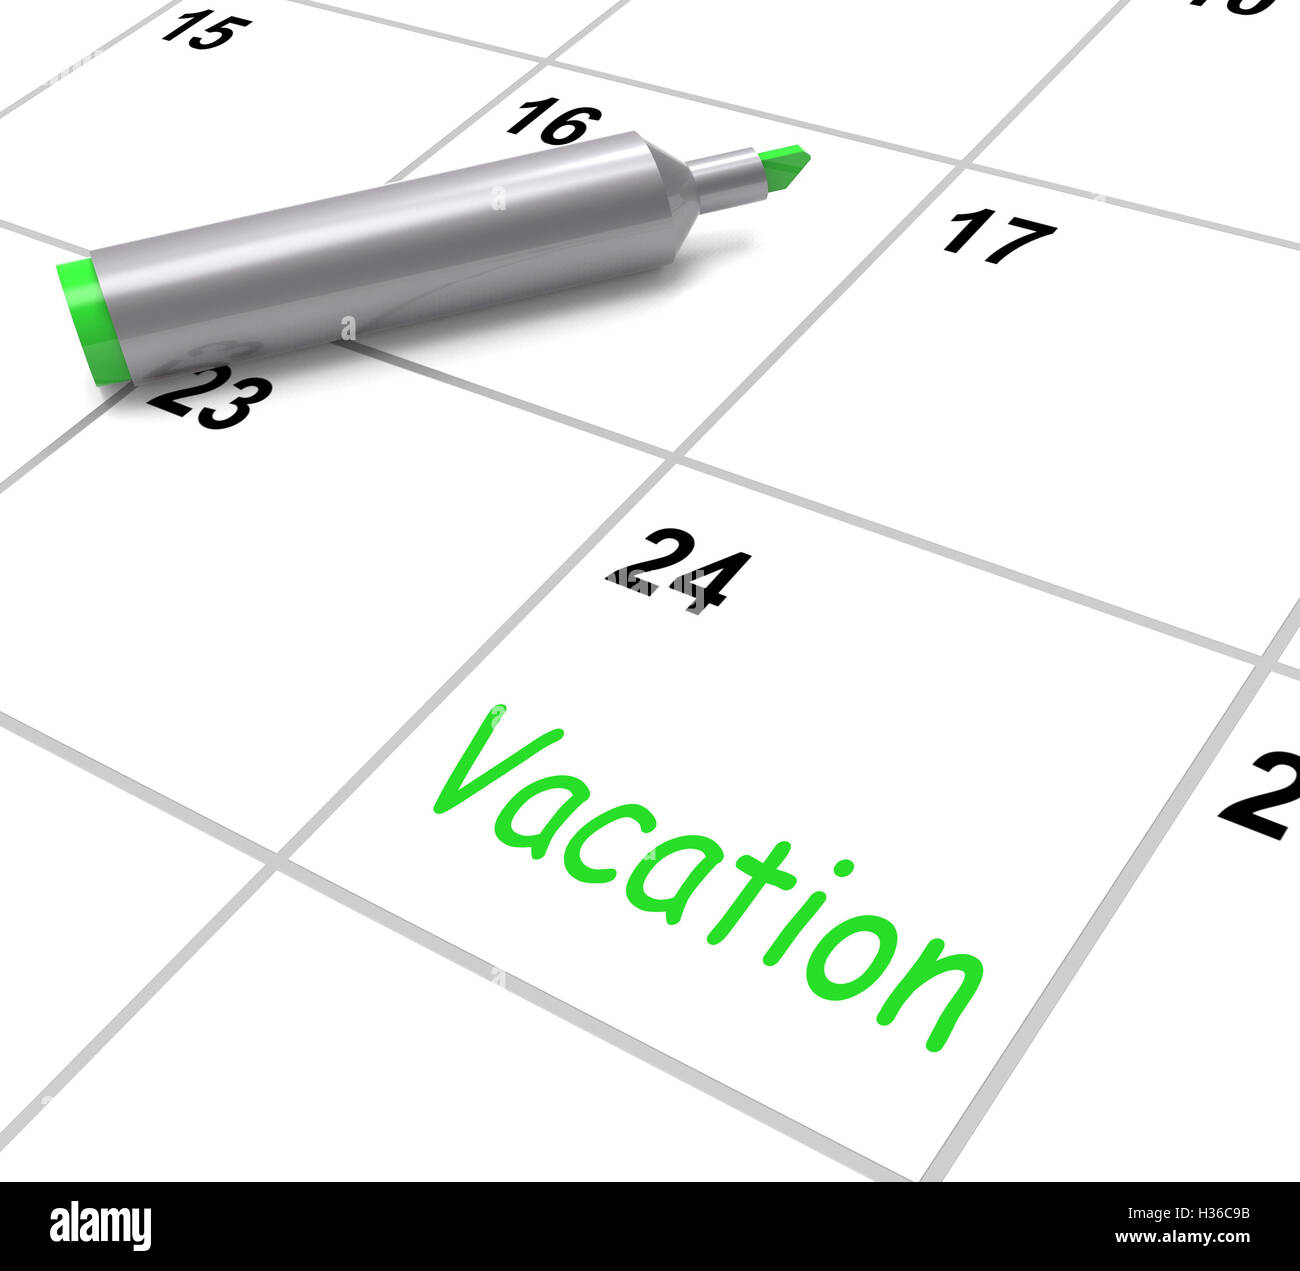 Vacation Calendar Shows Day Off Work Or Holiday Stock Photo